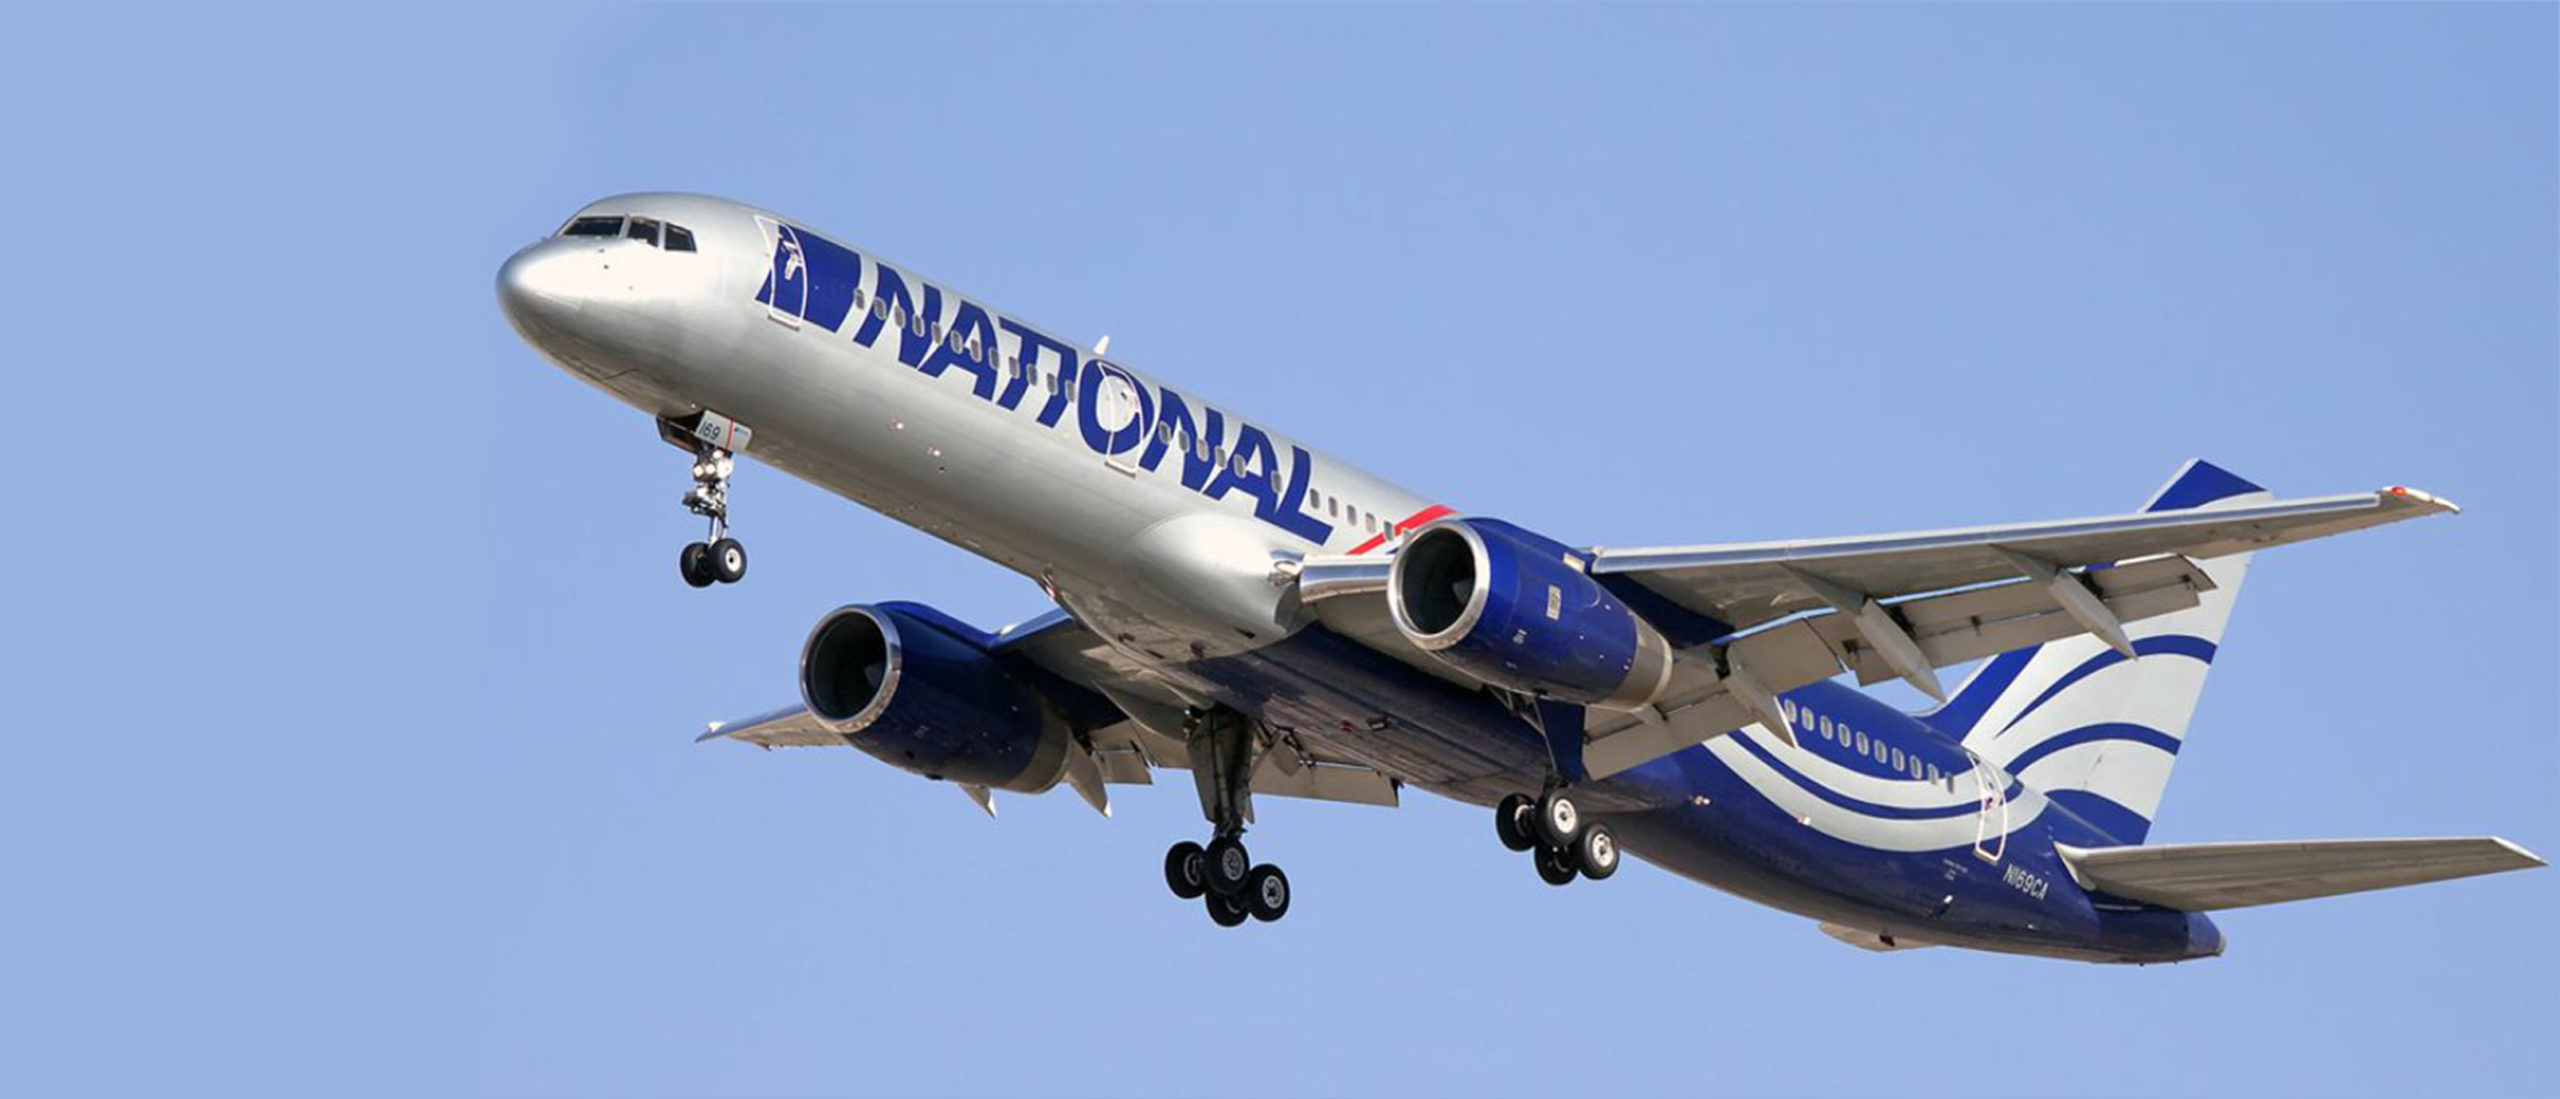 National Airlines Launch – Image